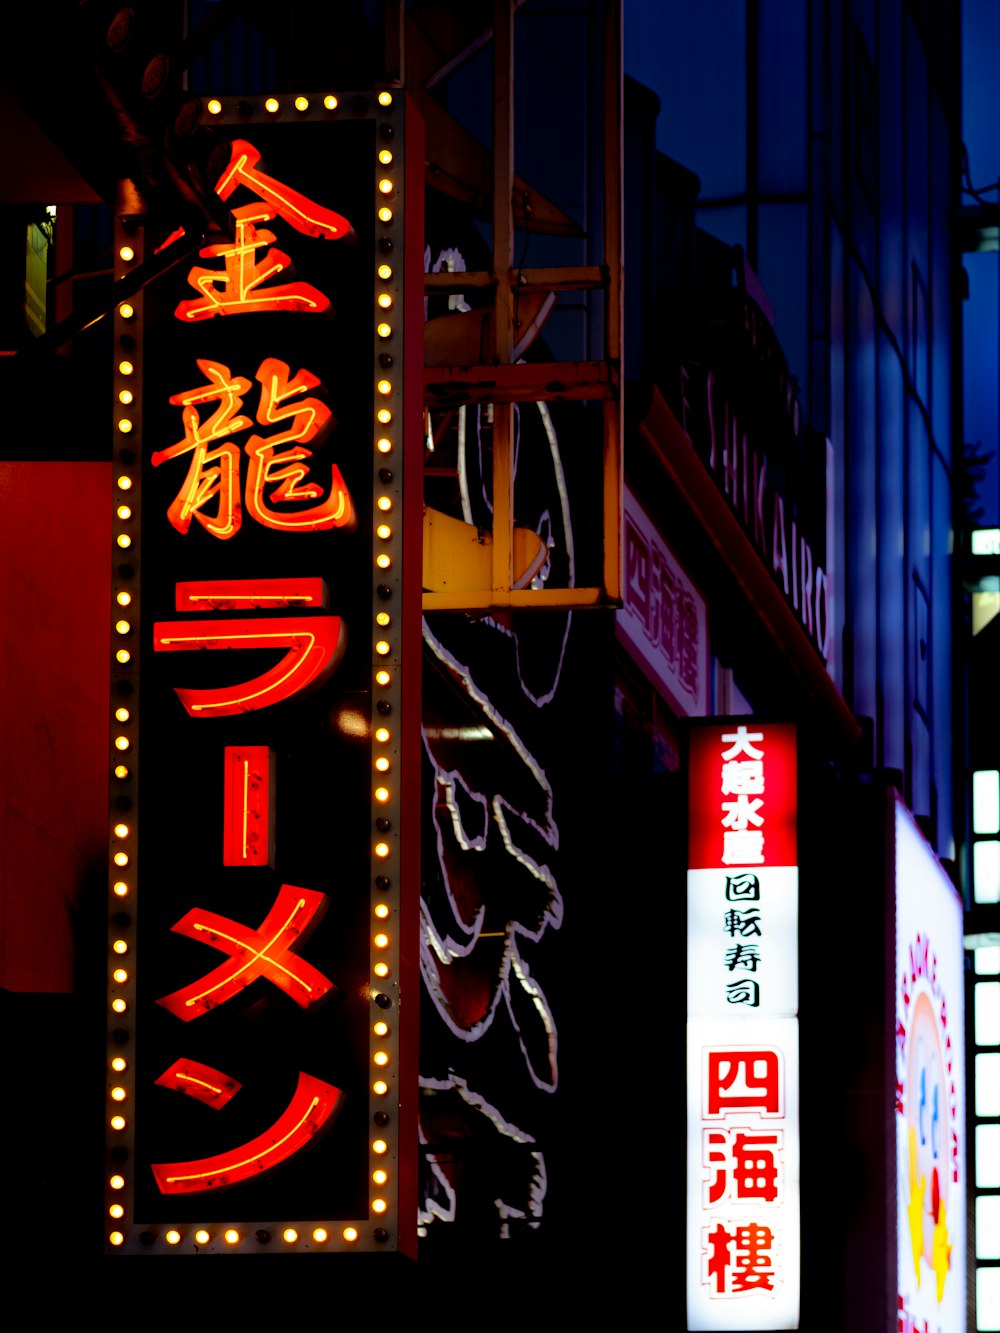 red and black kanji text neon light signage